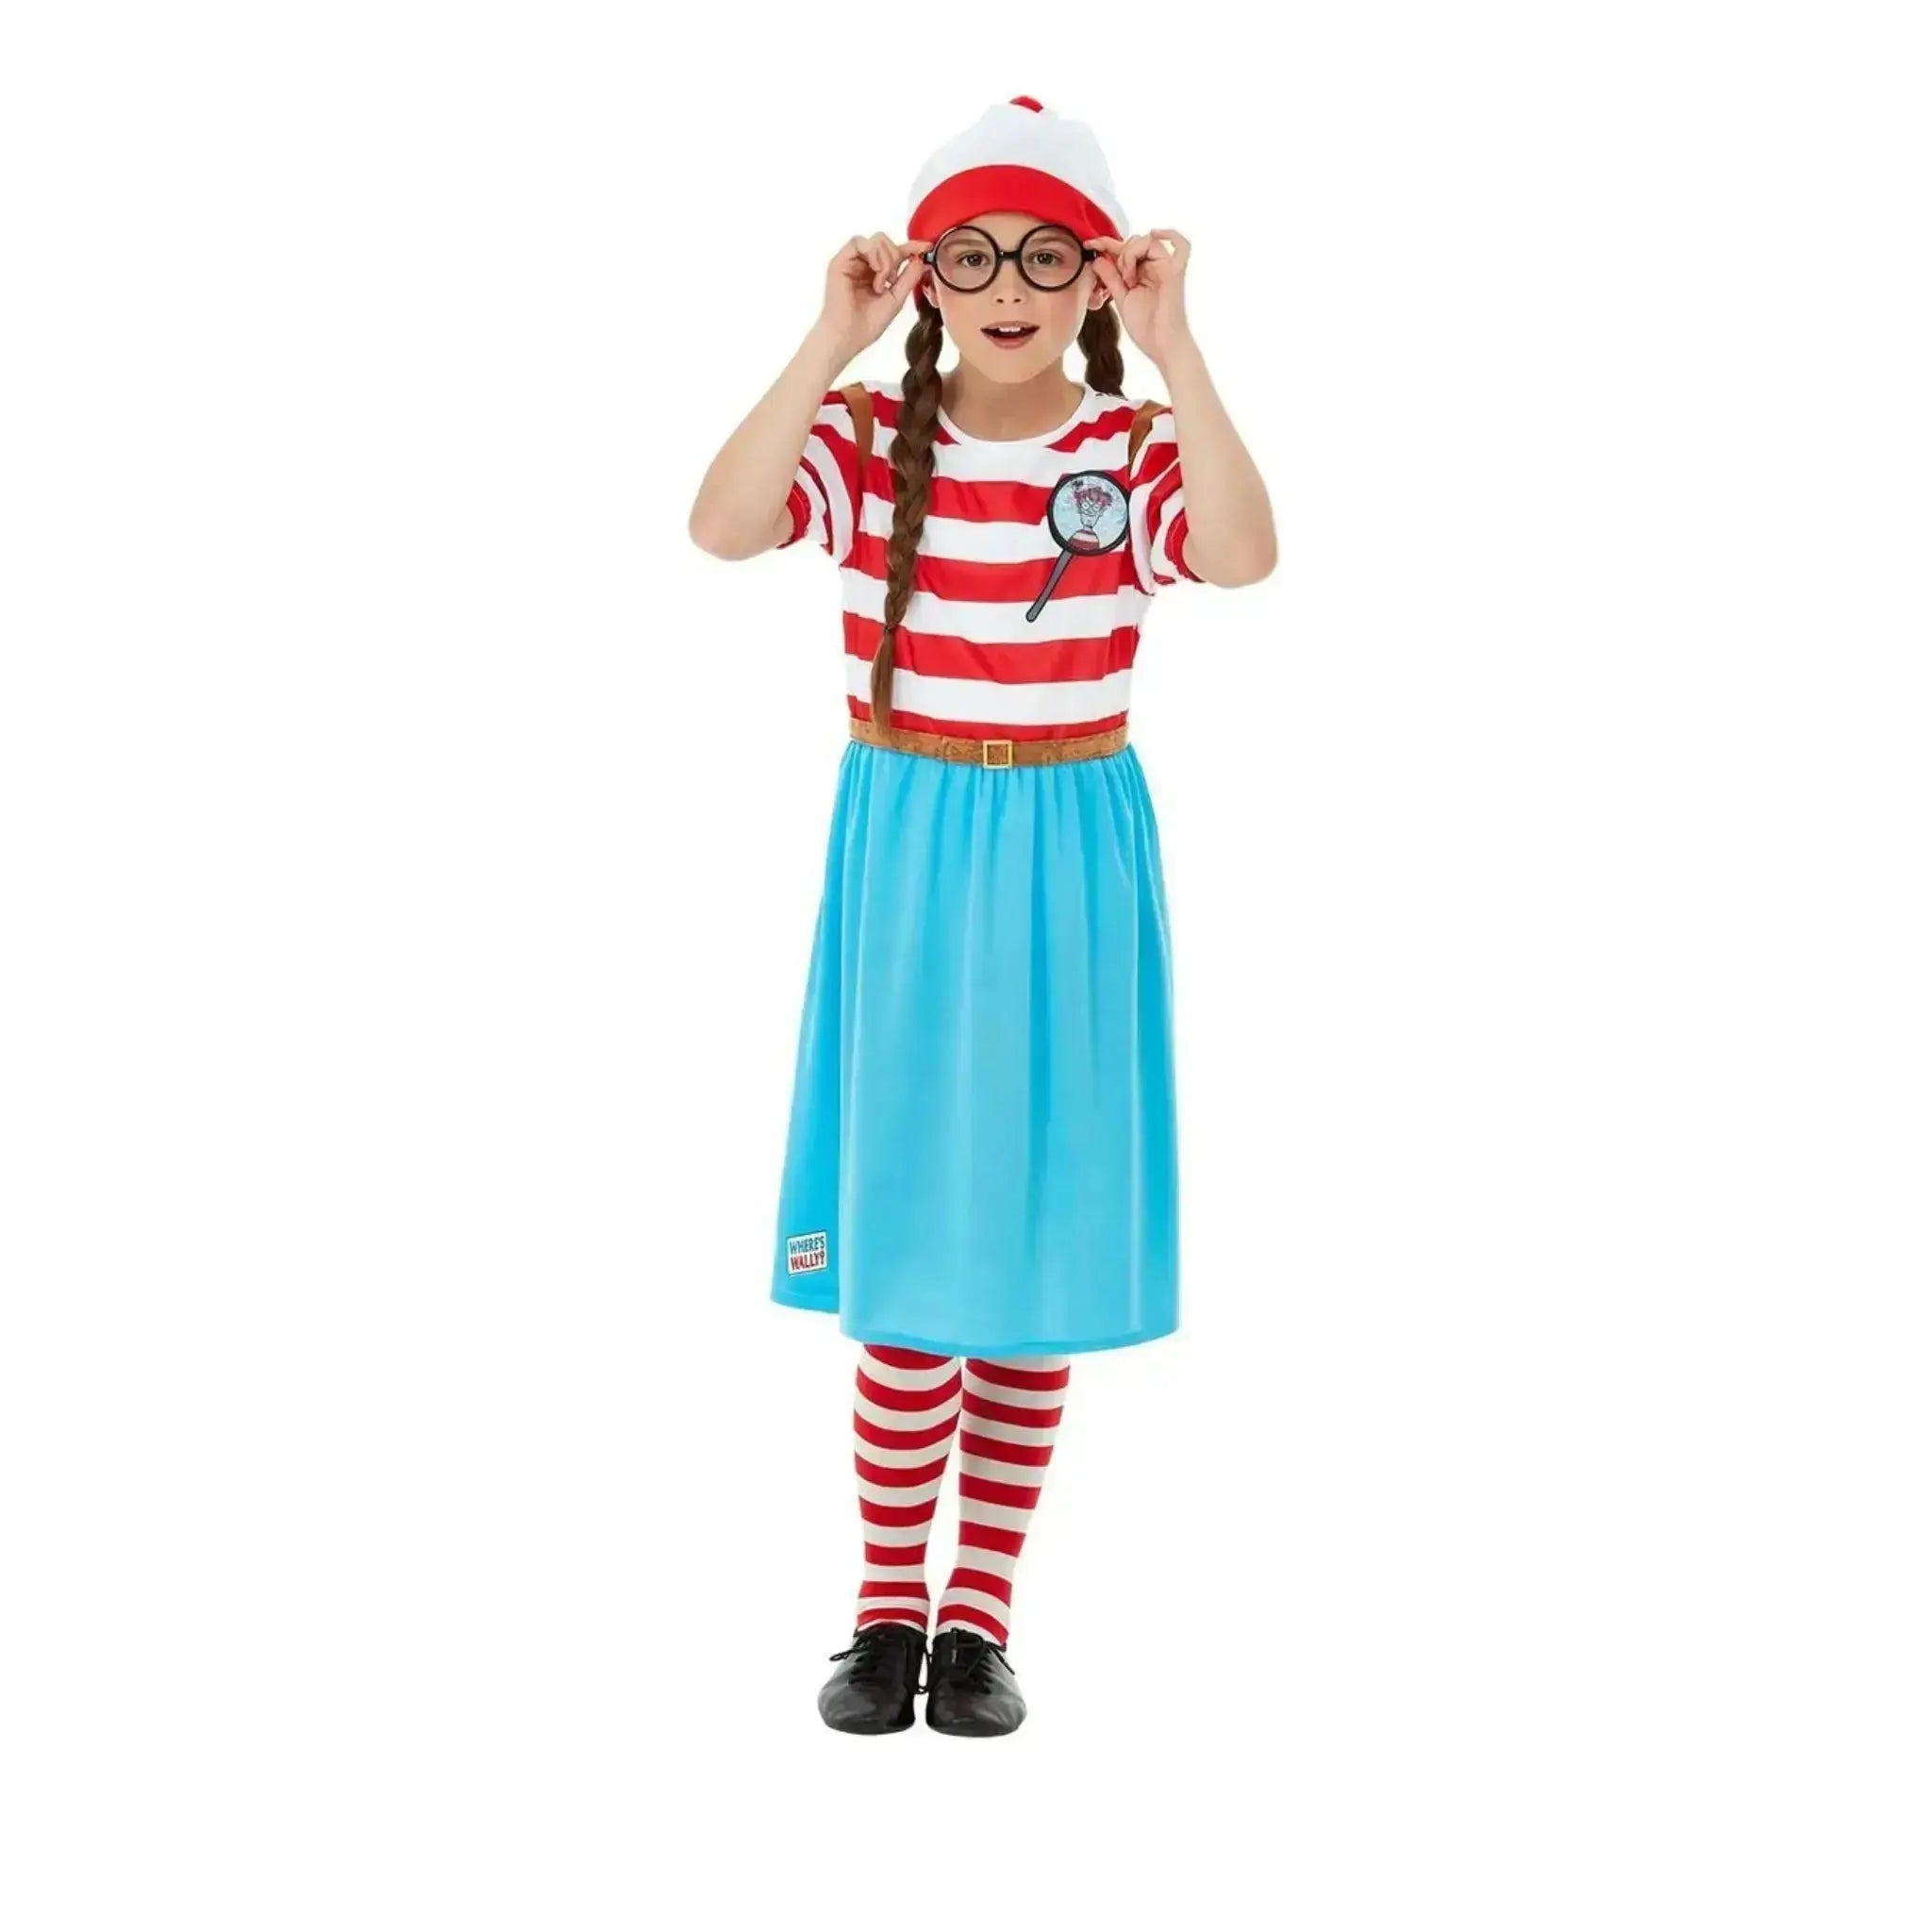 Where's Wally? Costume (Girls/Kids) | The Party Hut